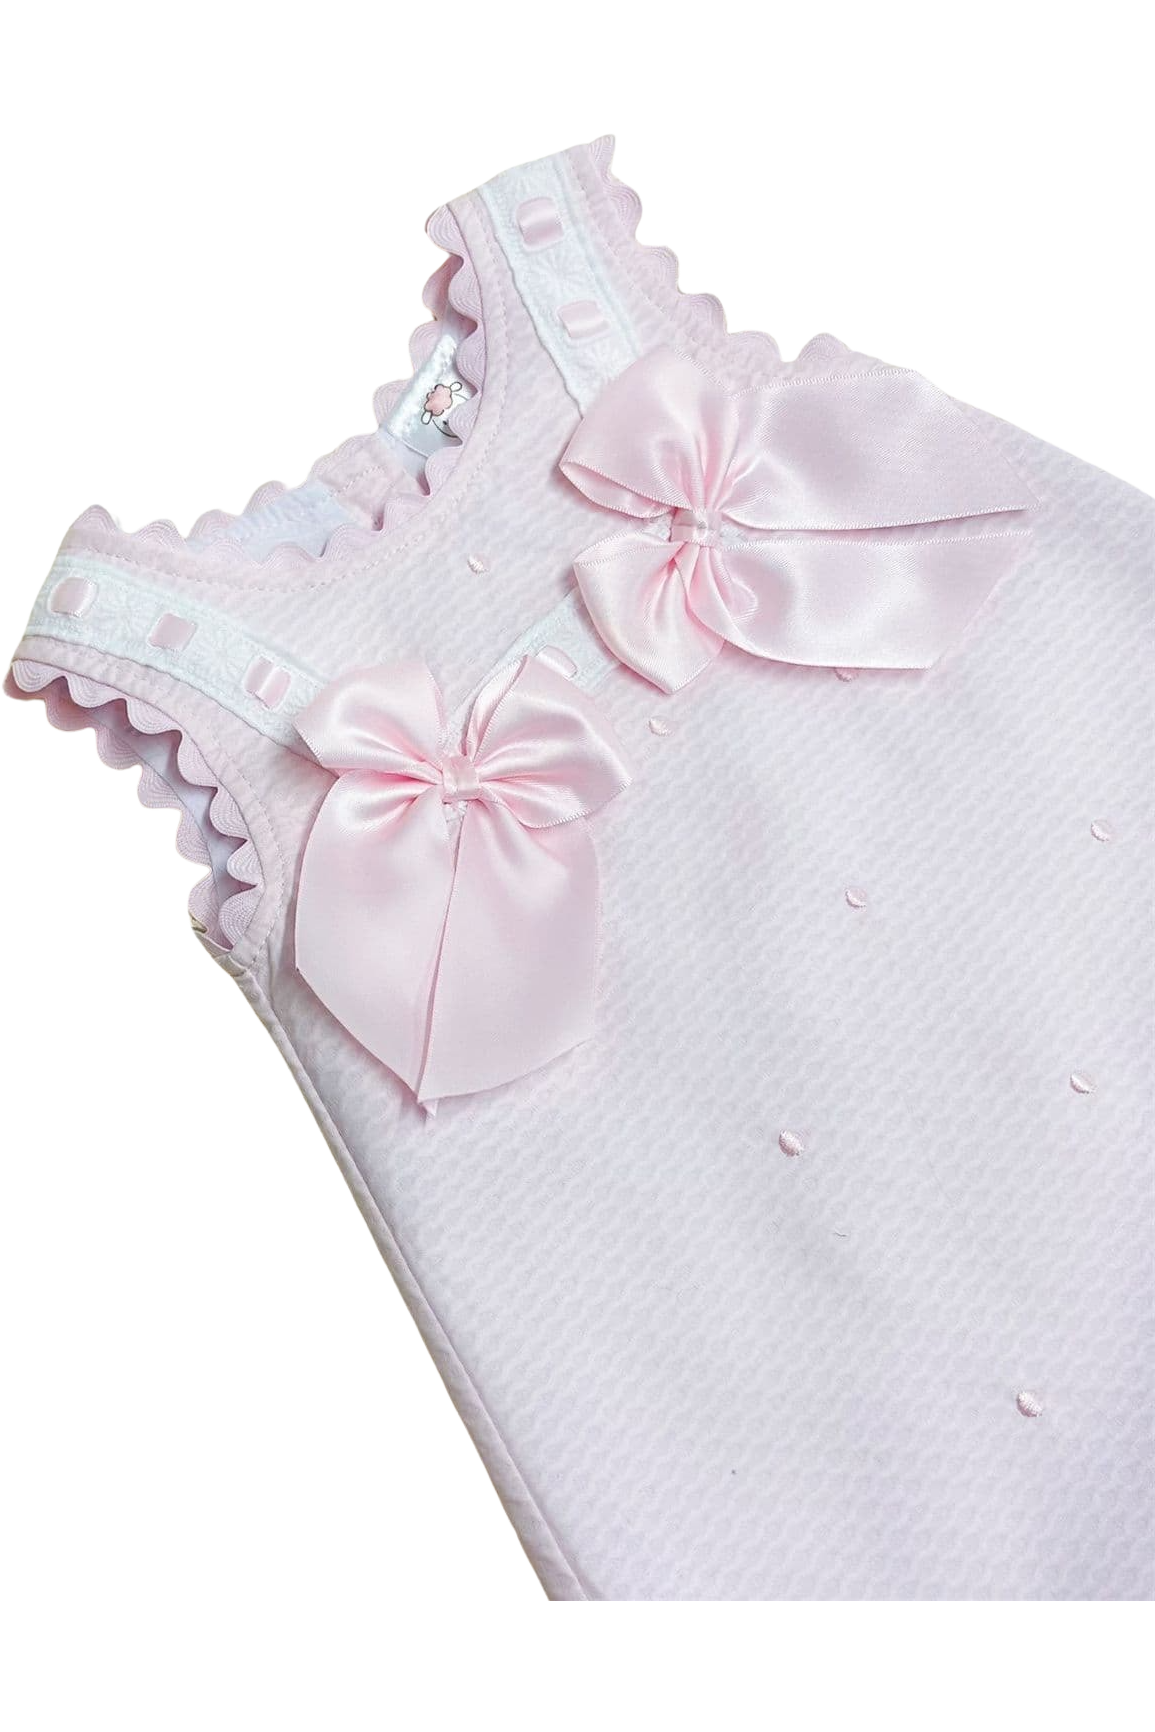 SS24 Baby Girls Pink A Line Dress Dainty Delilah